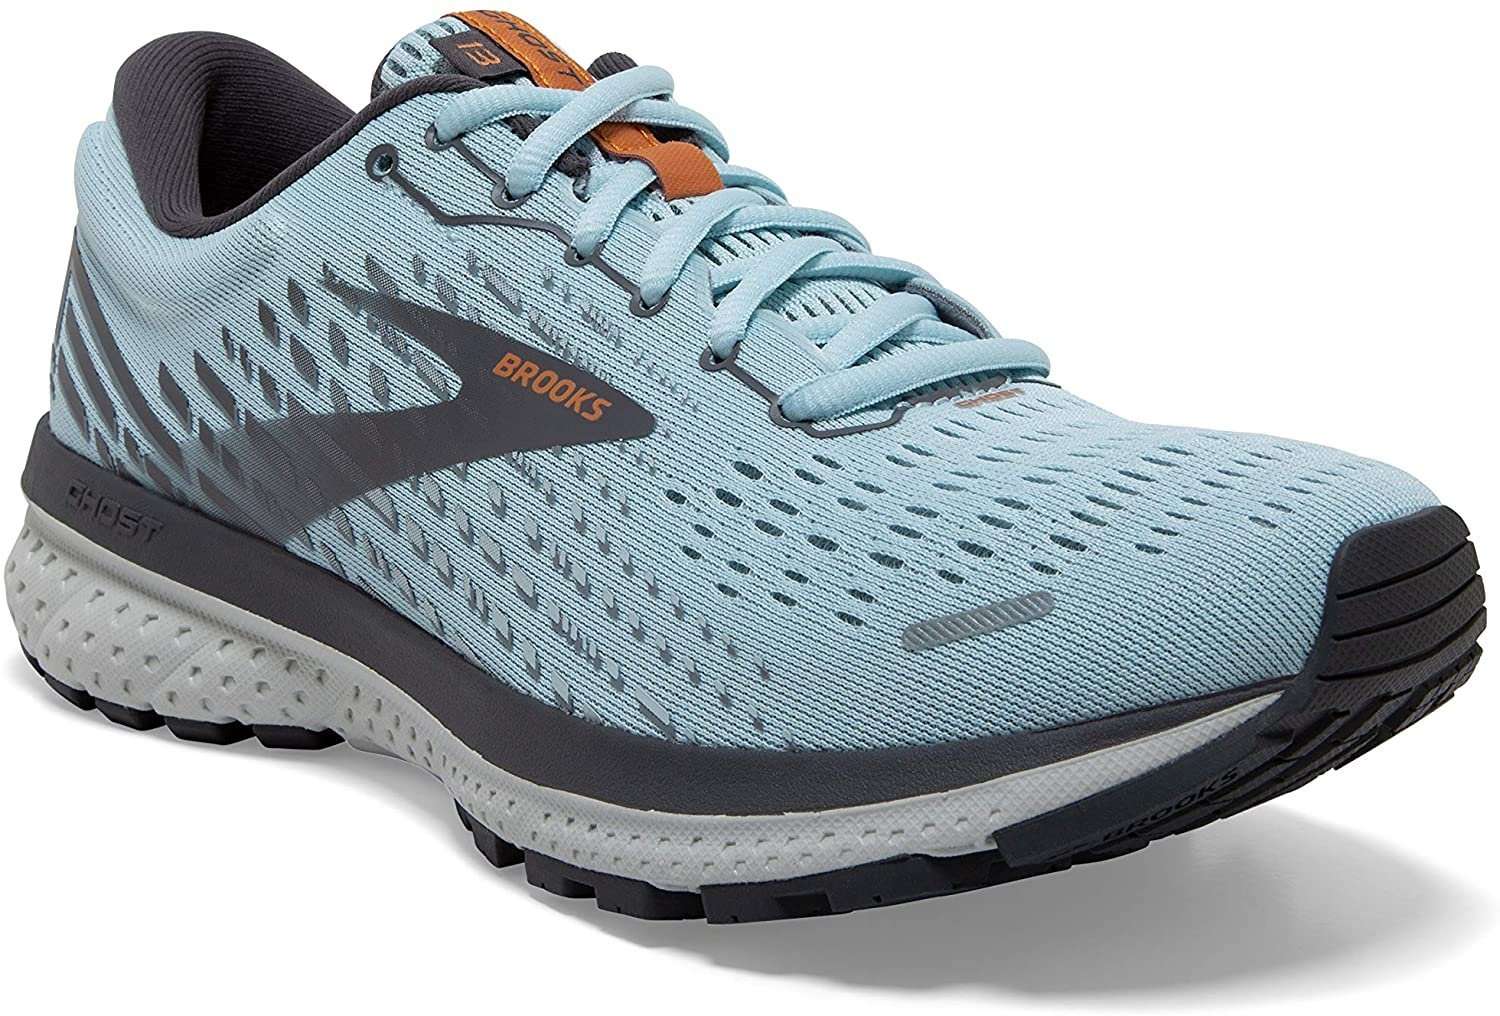 Best workout shoes for plantar fasciitis in 2021